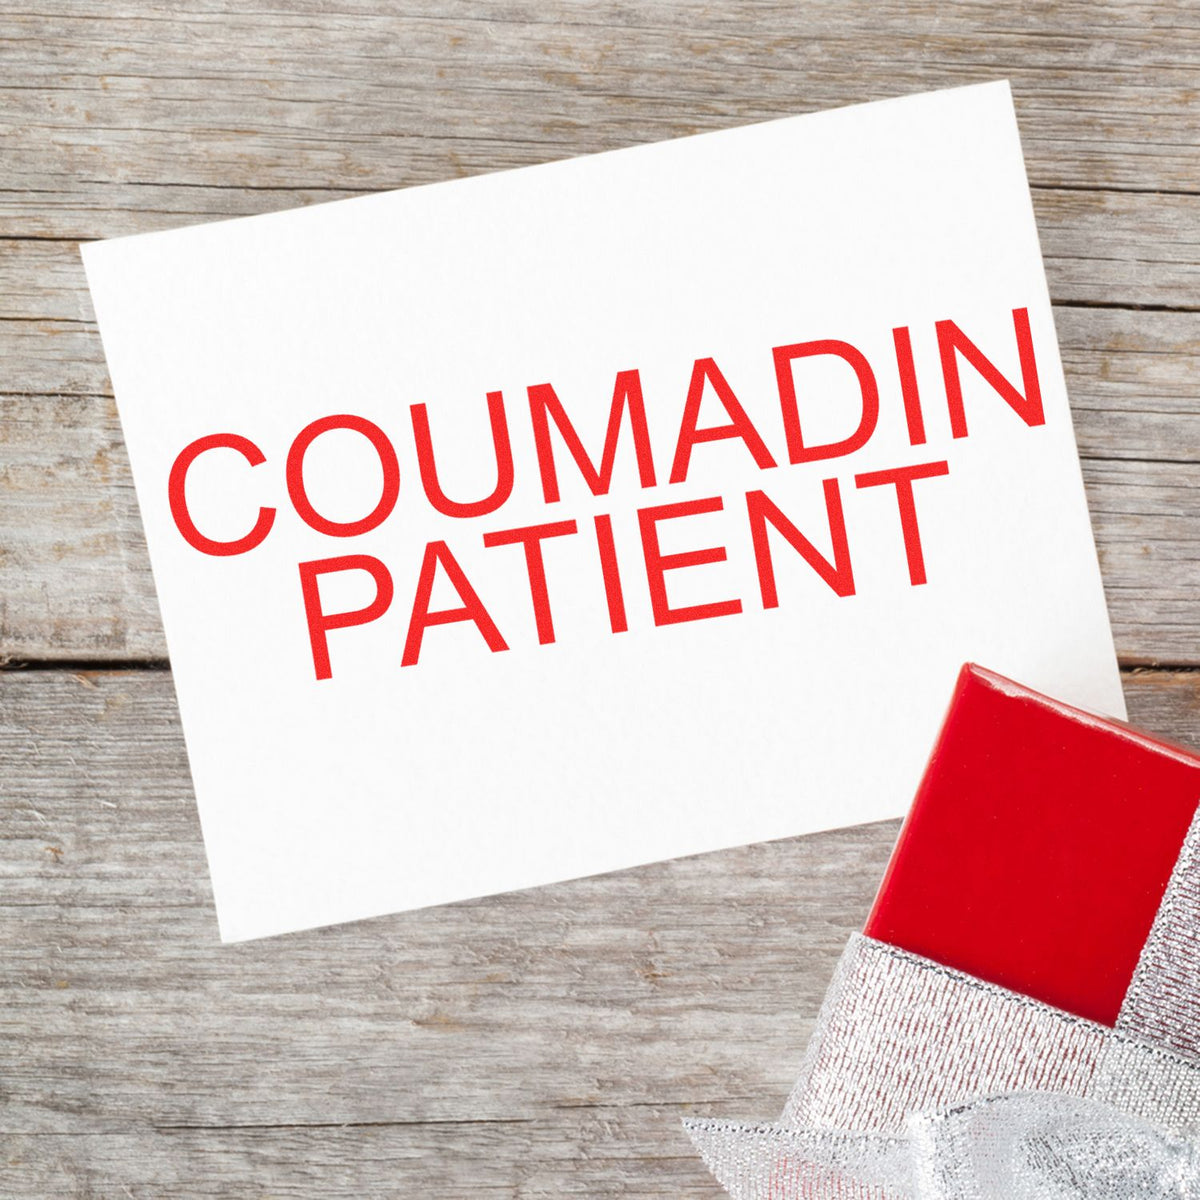 Self-Inking Coumadin Patient Stamp In Use Photo